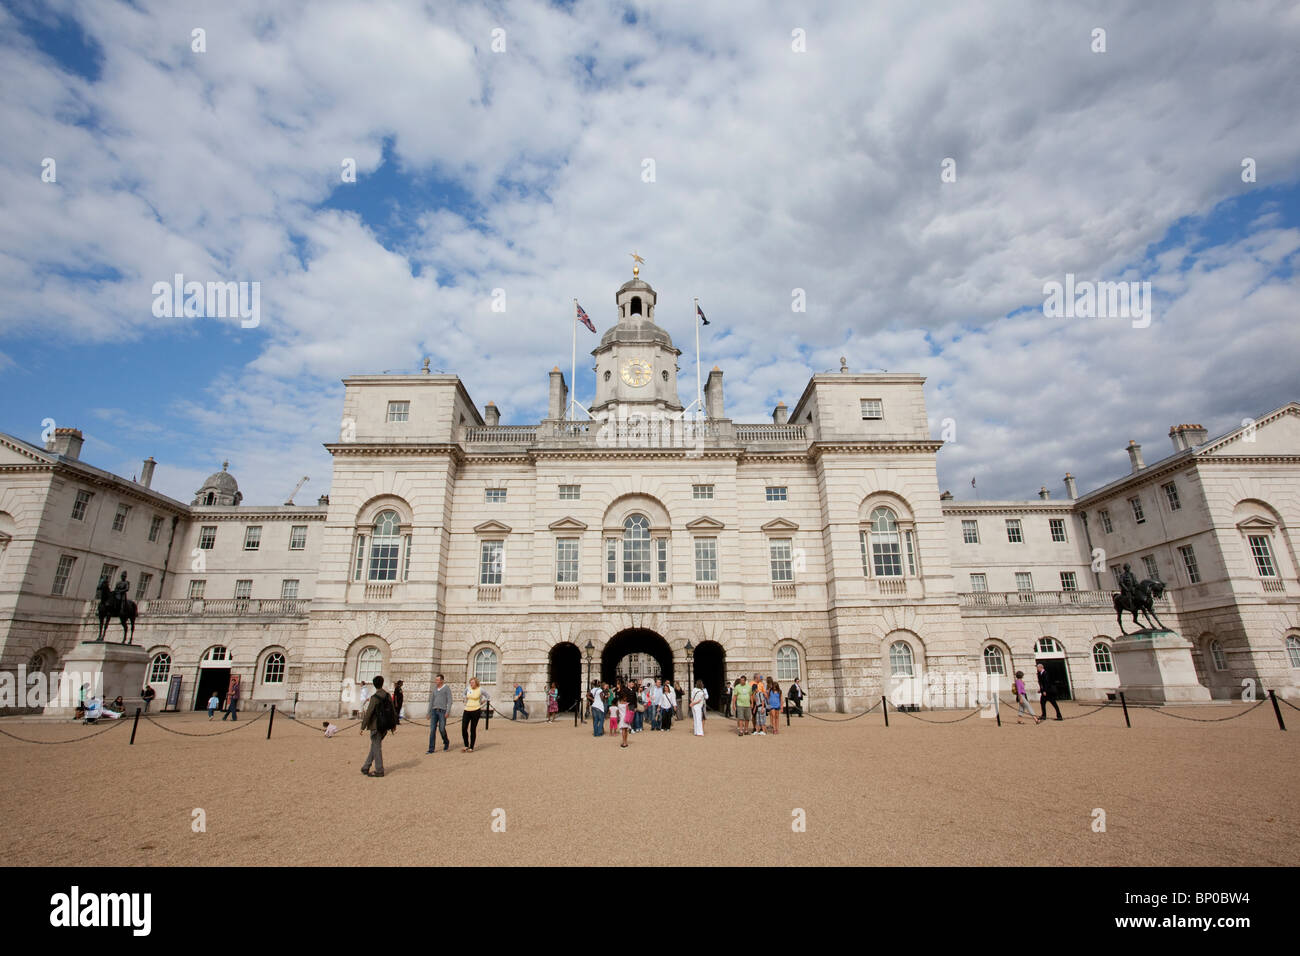 Image shows Horse Guards Parade off Whitehall in central London, United Kingdom. Photo:Jeff Gilbert Stock Photo